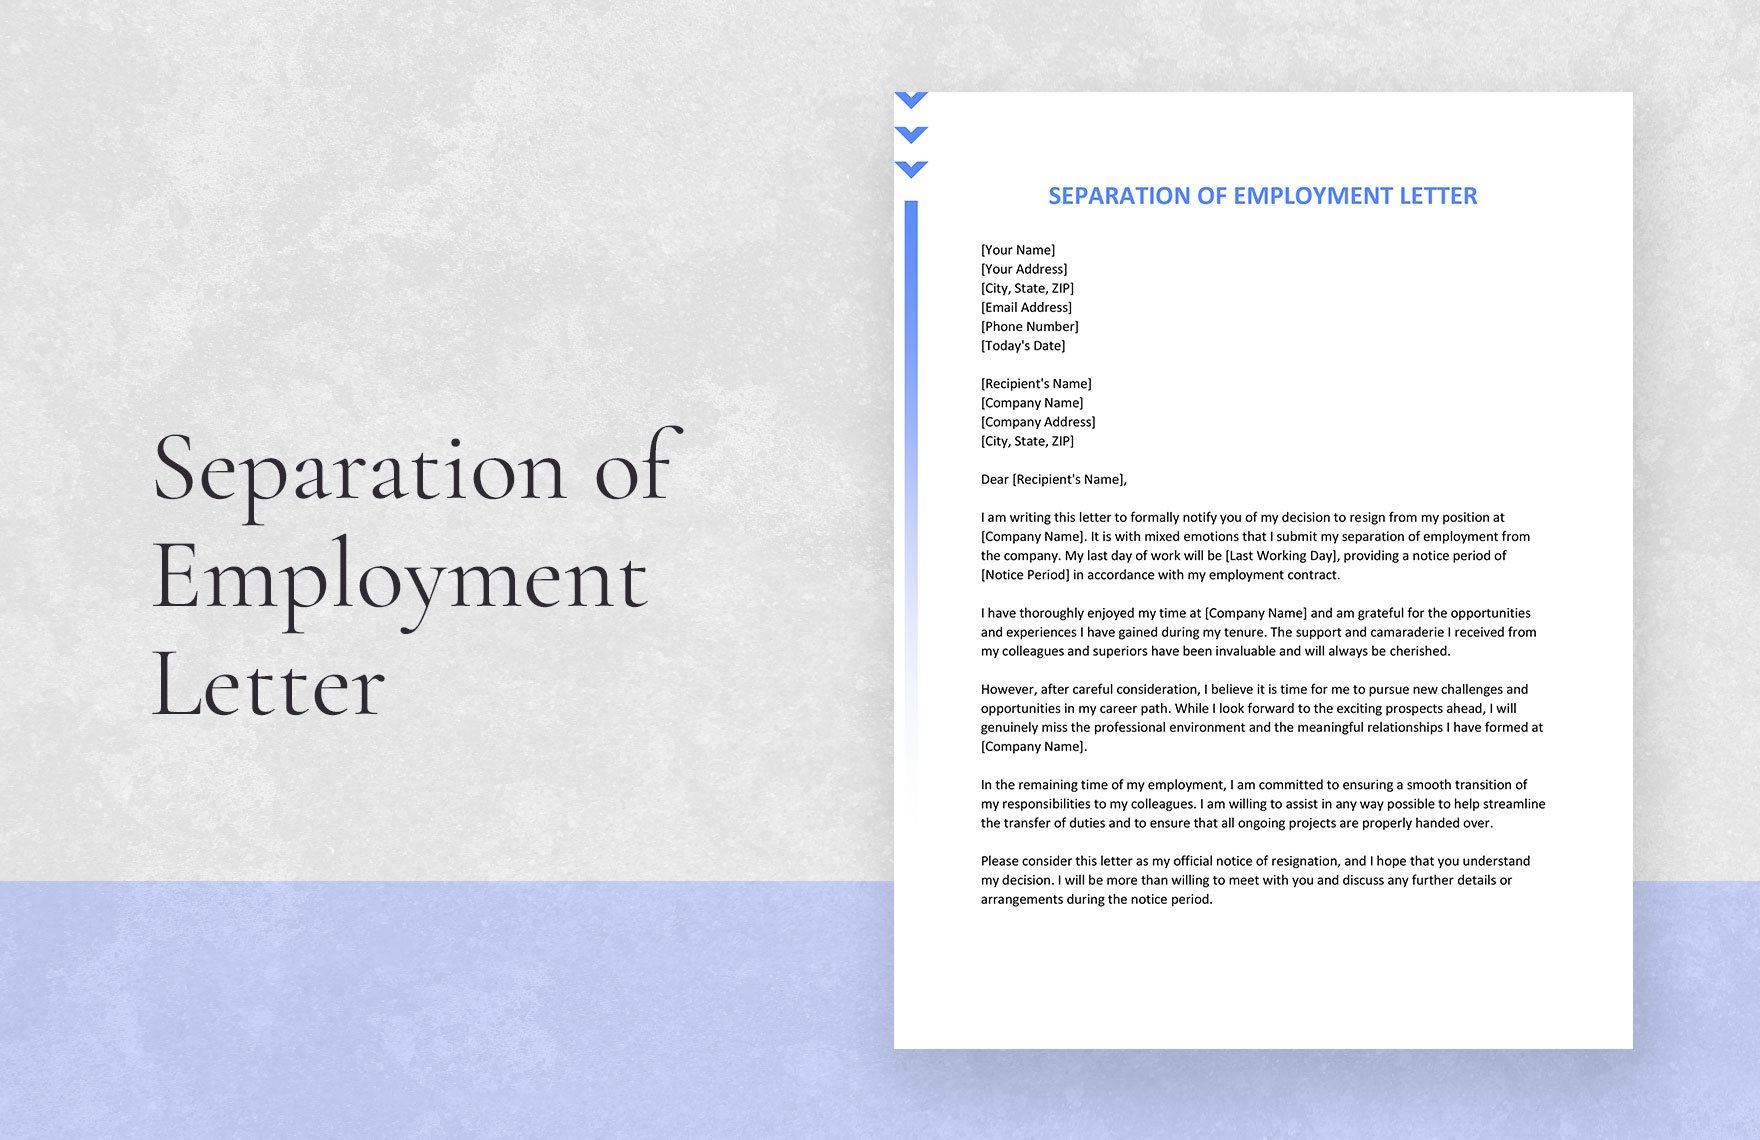 Formal Letter Template in Apple Pages, Imac